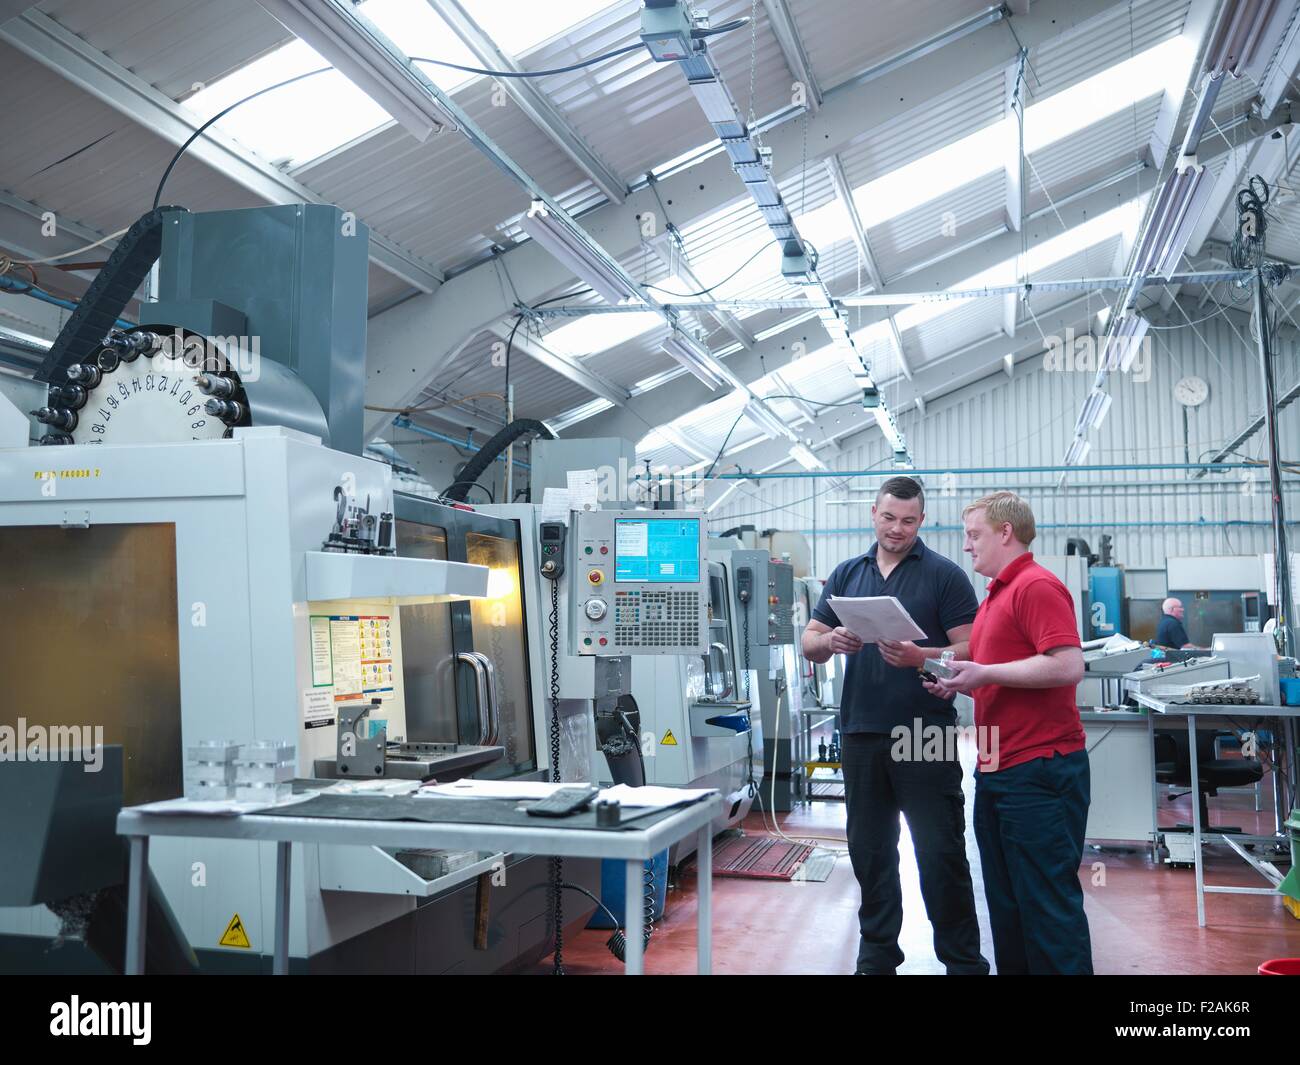 Engineers discussing work in front of CNC machines in engineering factory Stock Photo